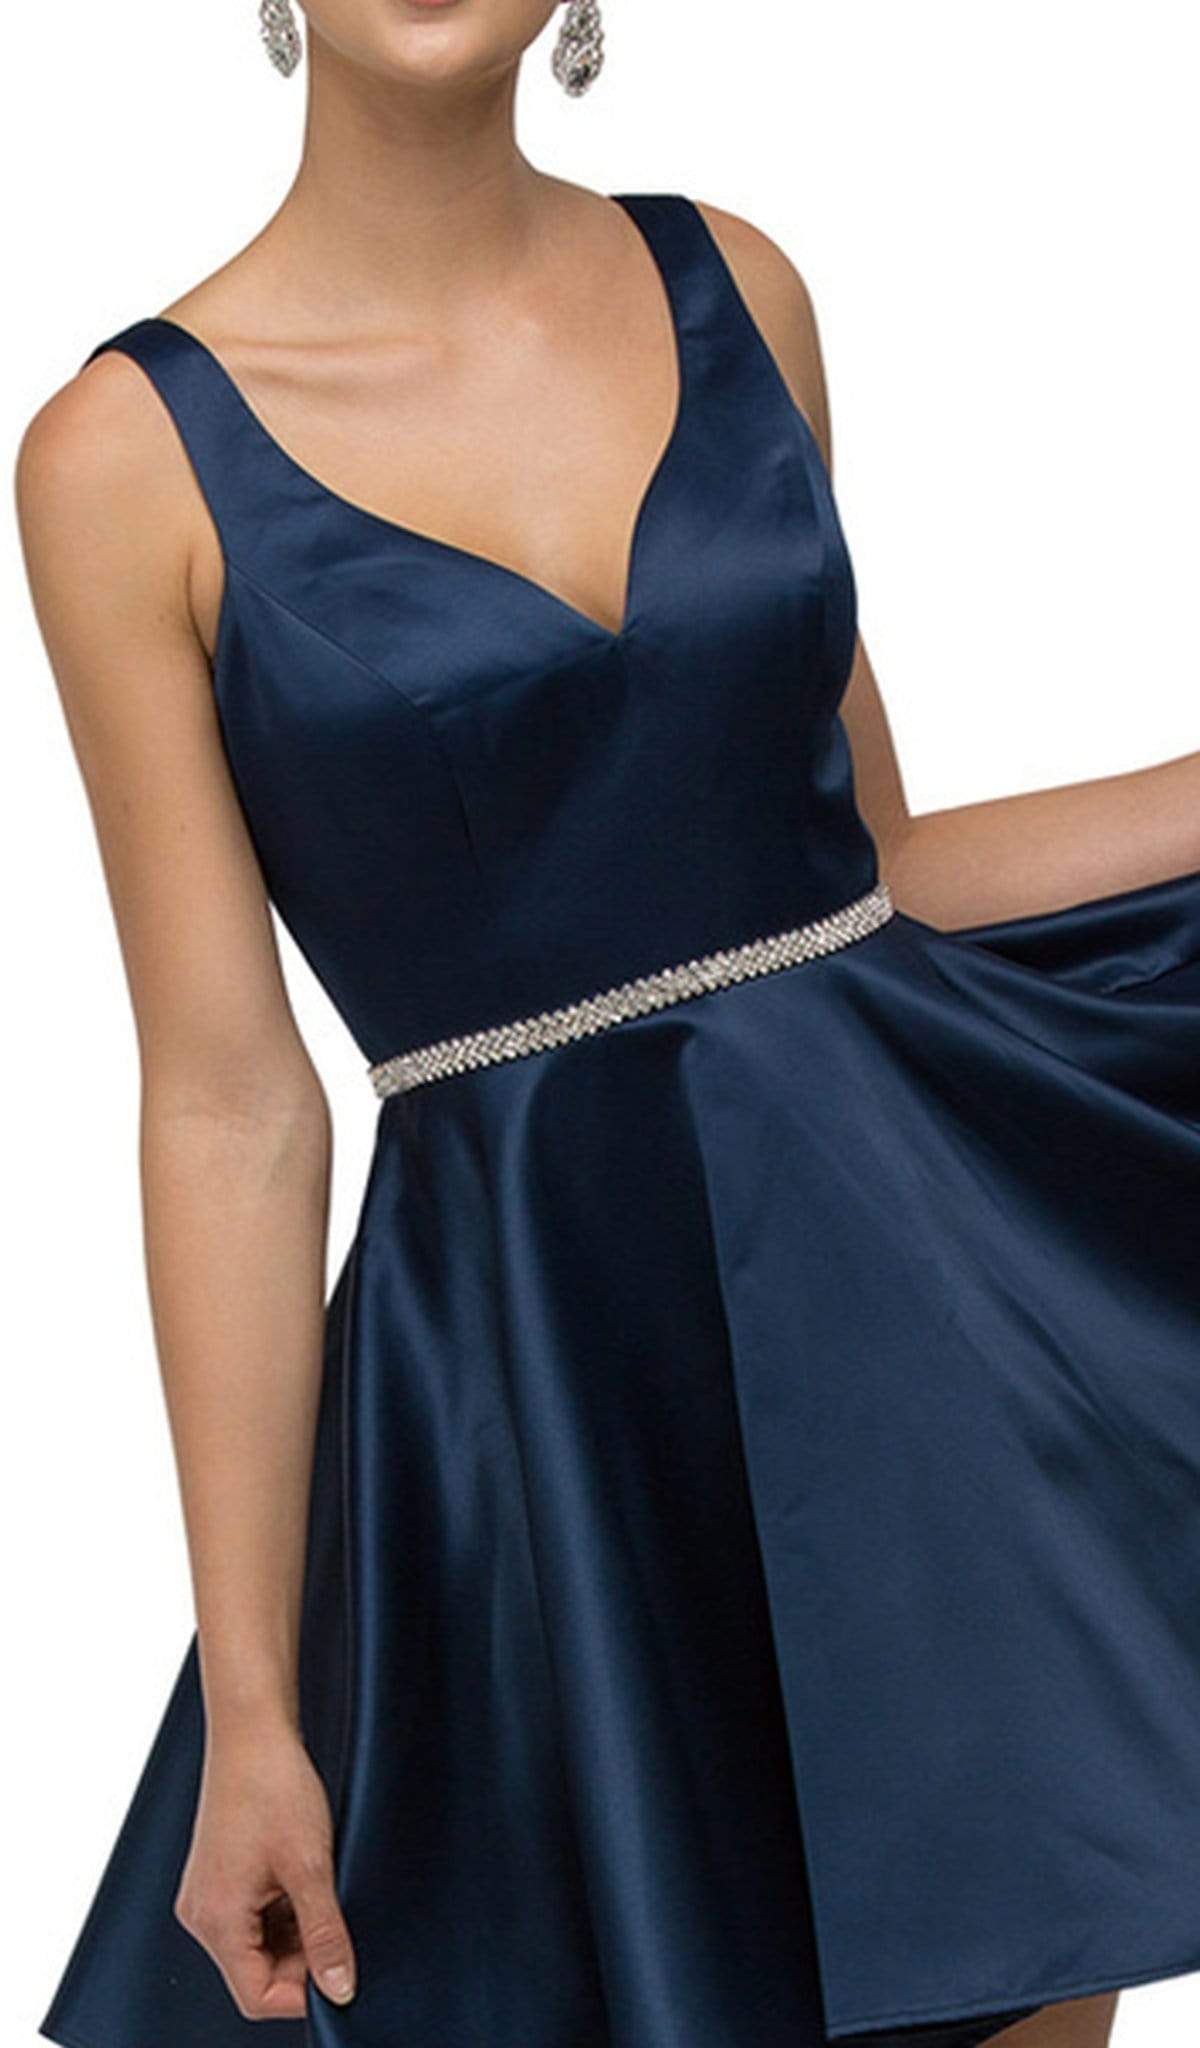 Dancing Queen - 9504 Sleeveless Sweetheart Satin Bejeweled Cocktail Dress Cocktail Dresses